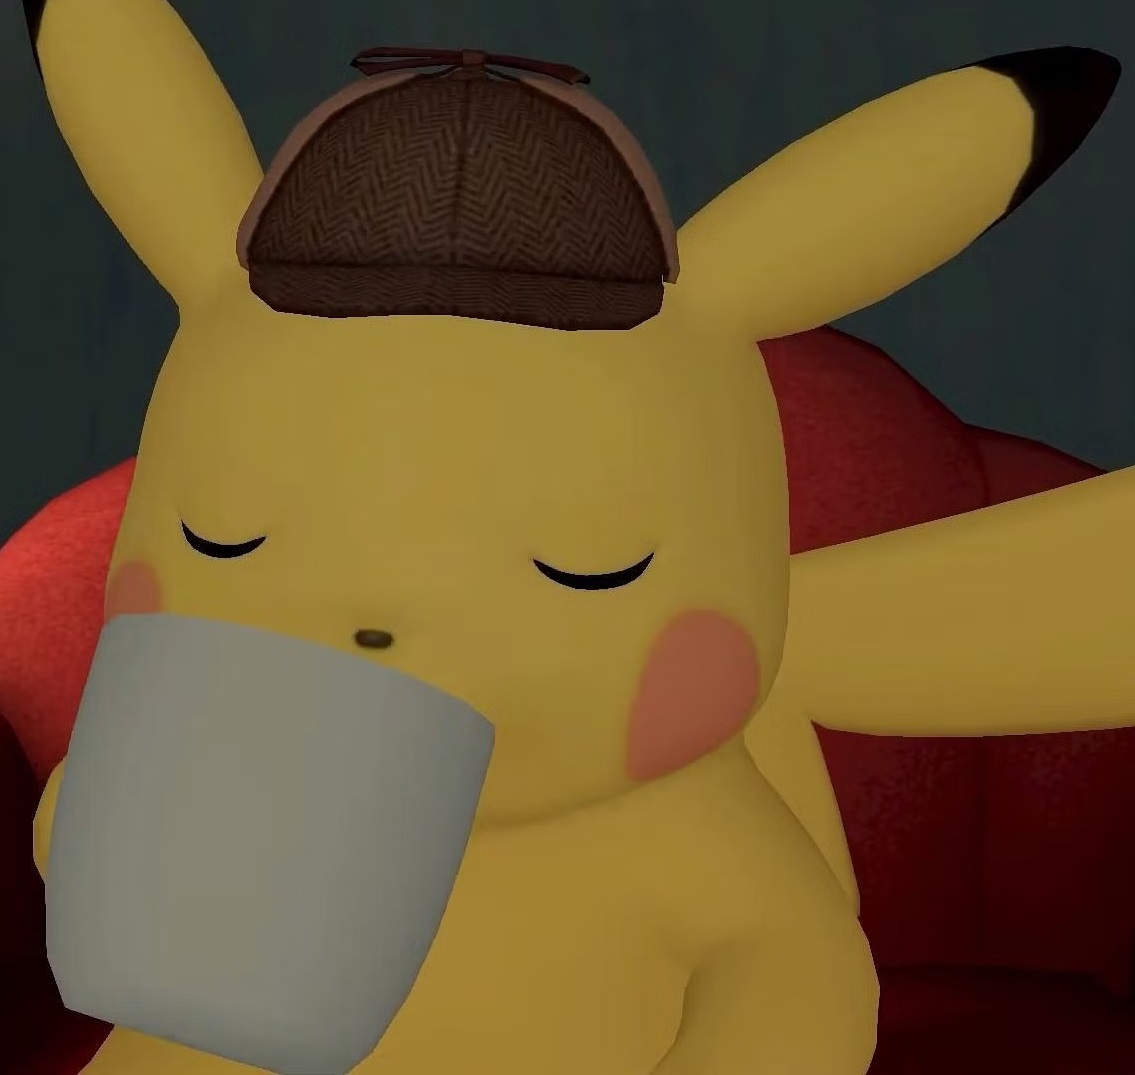 Detective Pikachu drinking a cup of coffee